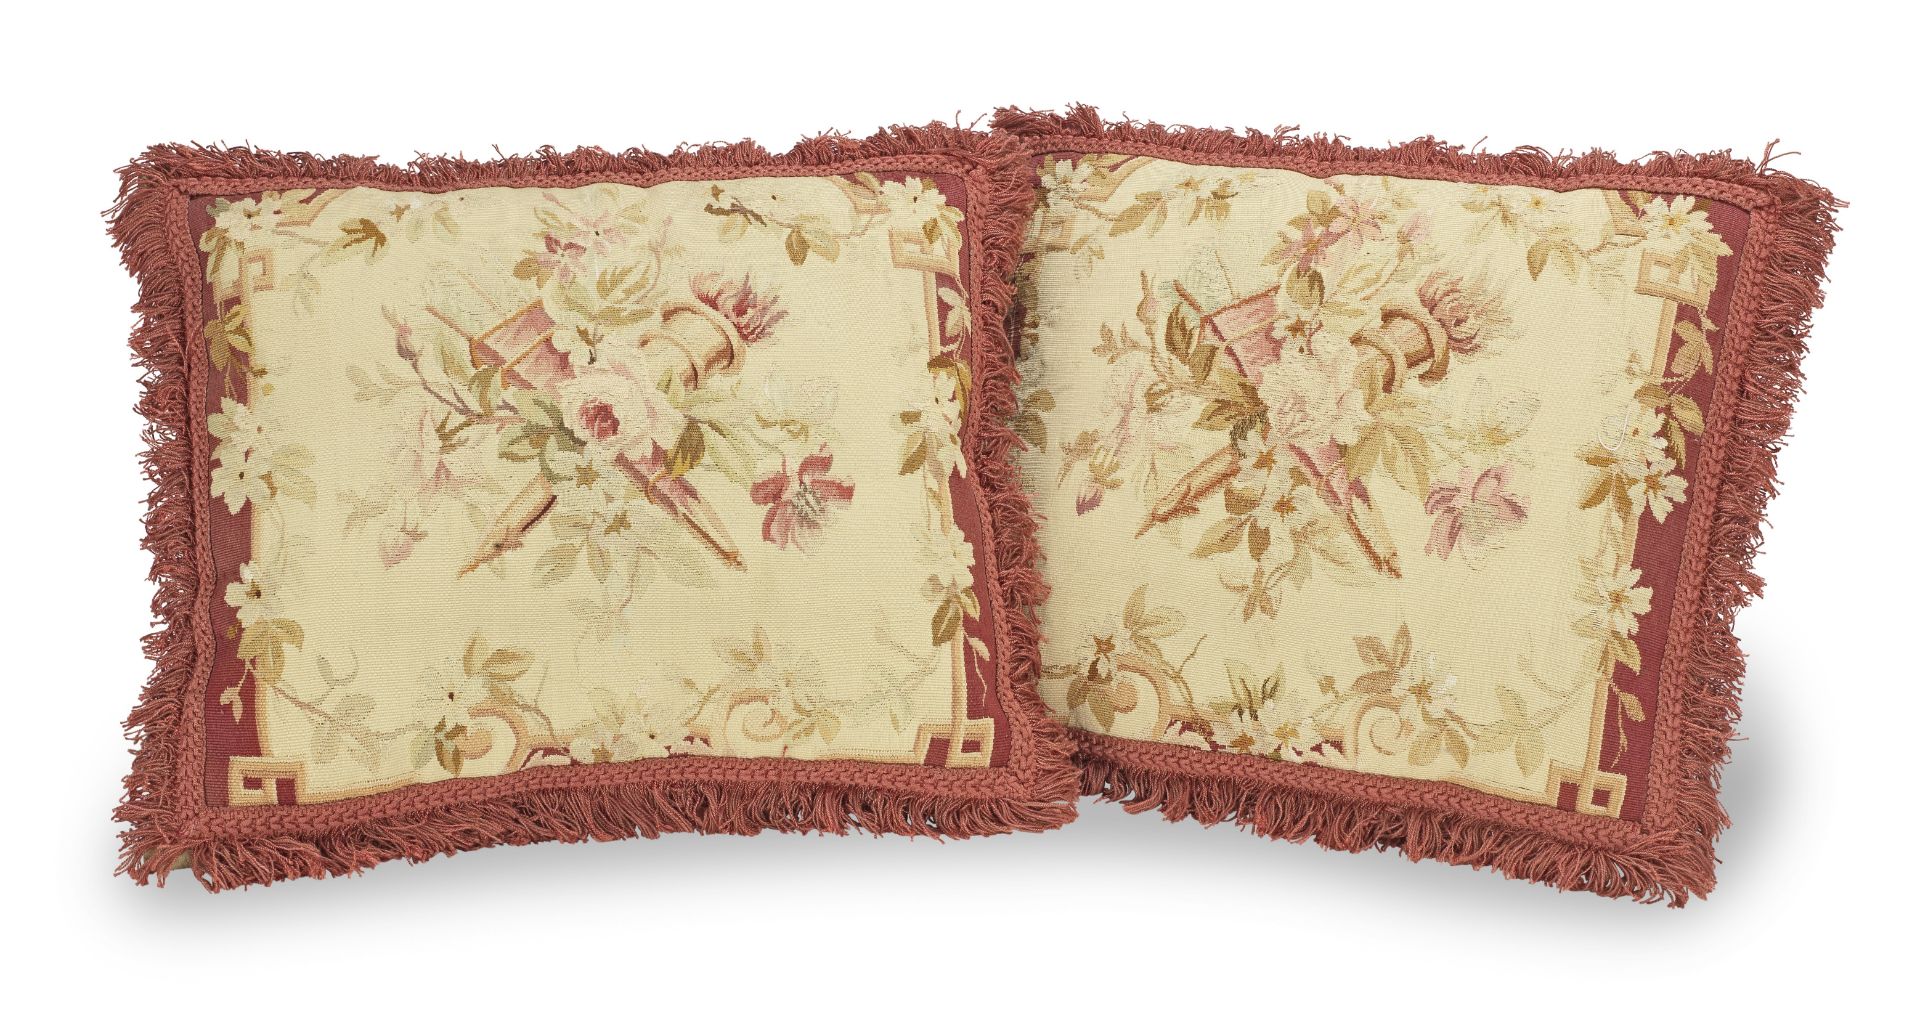 A 19th century pair of Aubusson cushions, 44.5cm x 38cm including the tassels